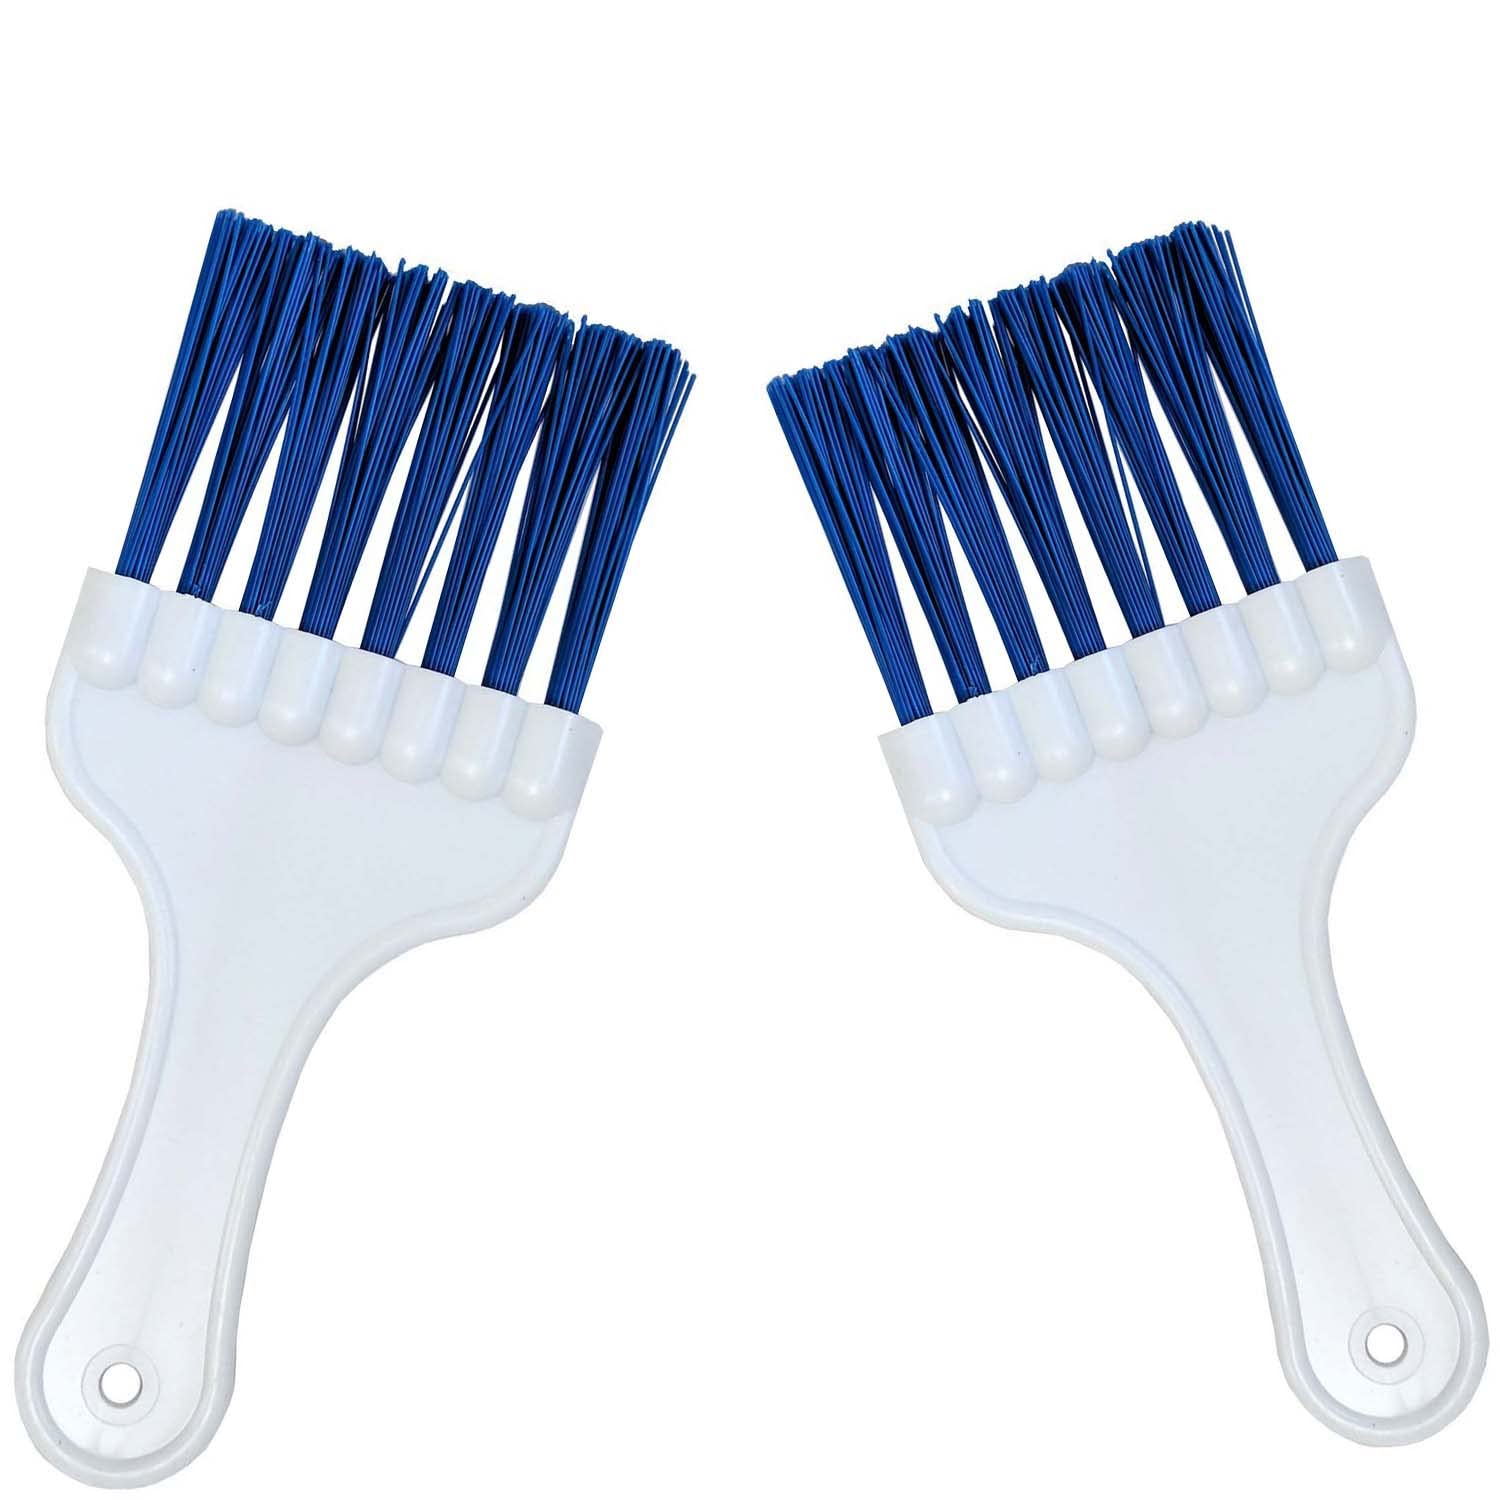  4 Packs Air Conditioner Condenser Cleaning Brush